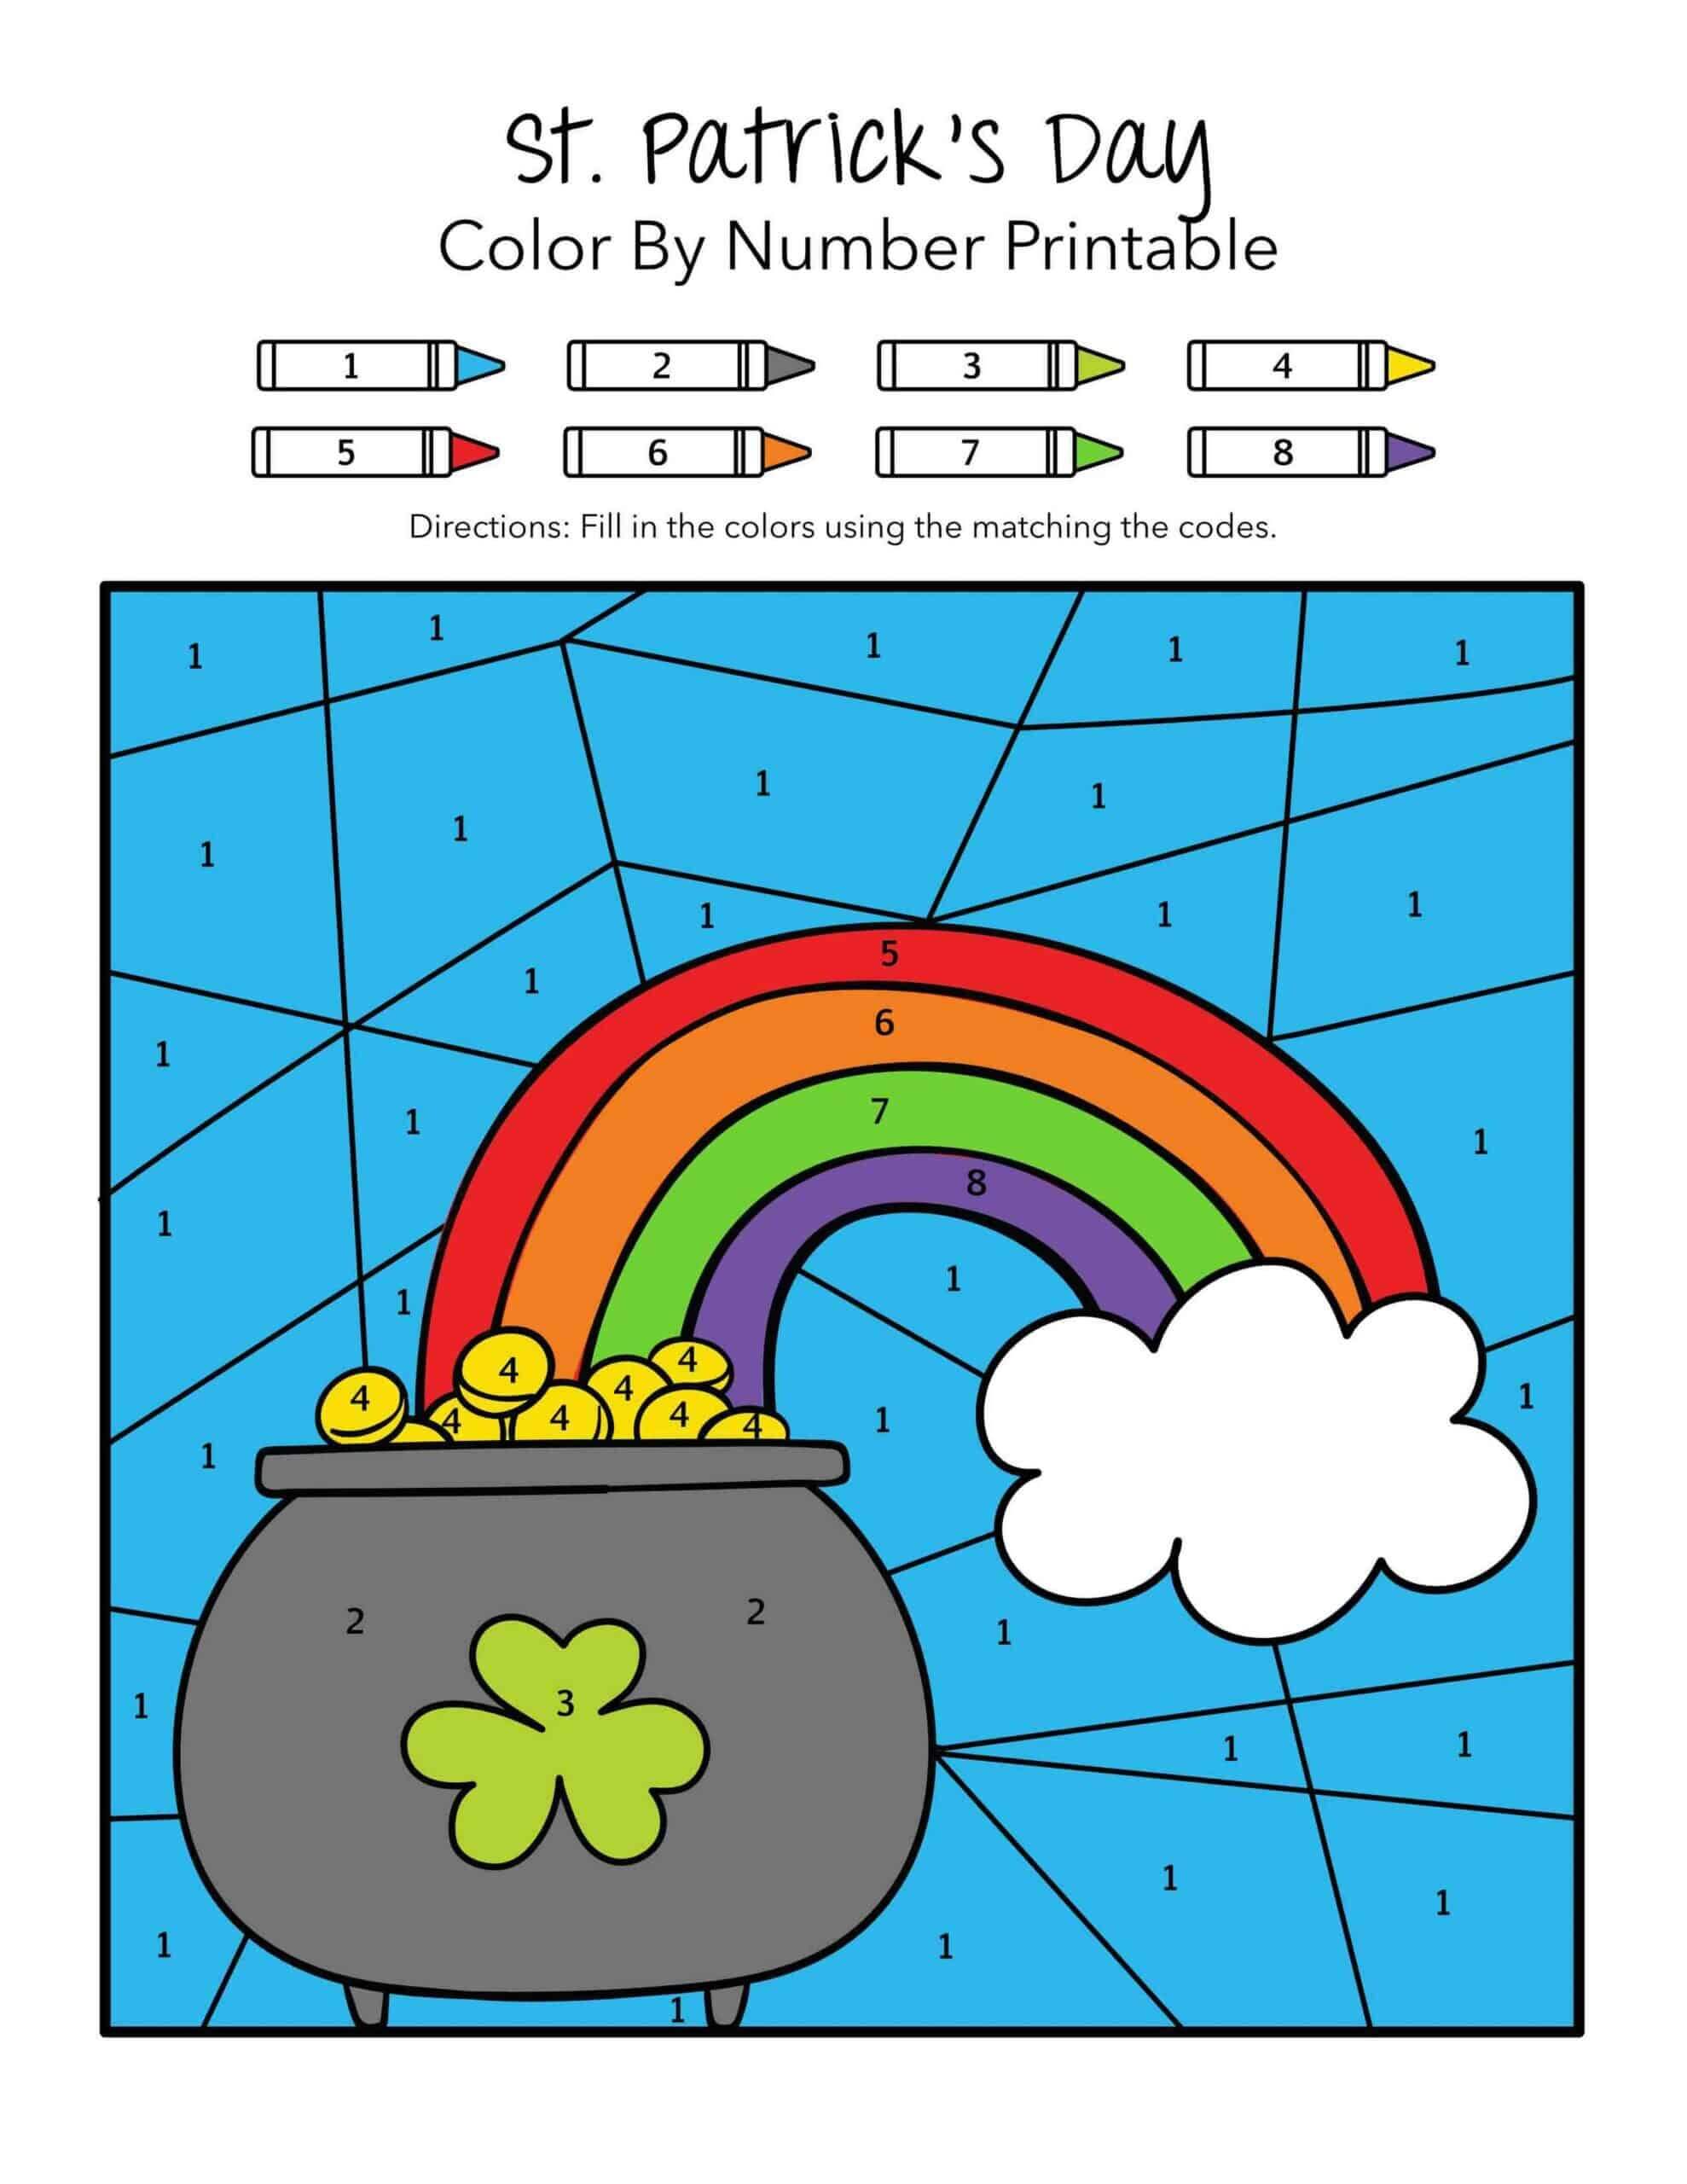 Money Jar With Rainbow From St Patrick’s Day Color By Number Color By Number